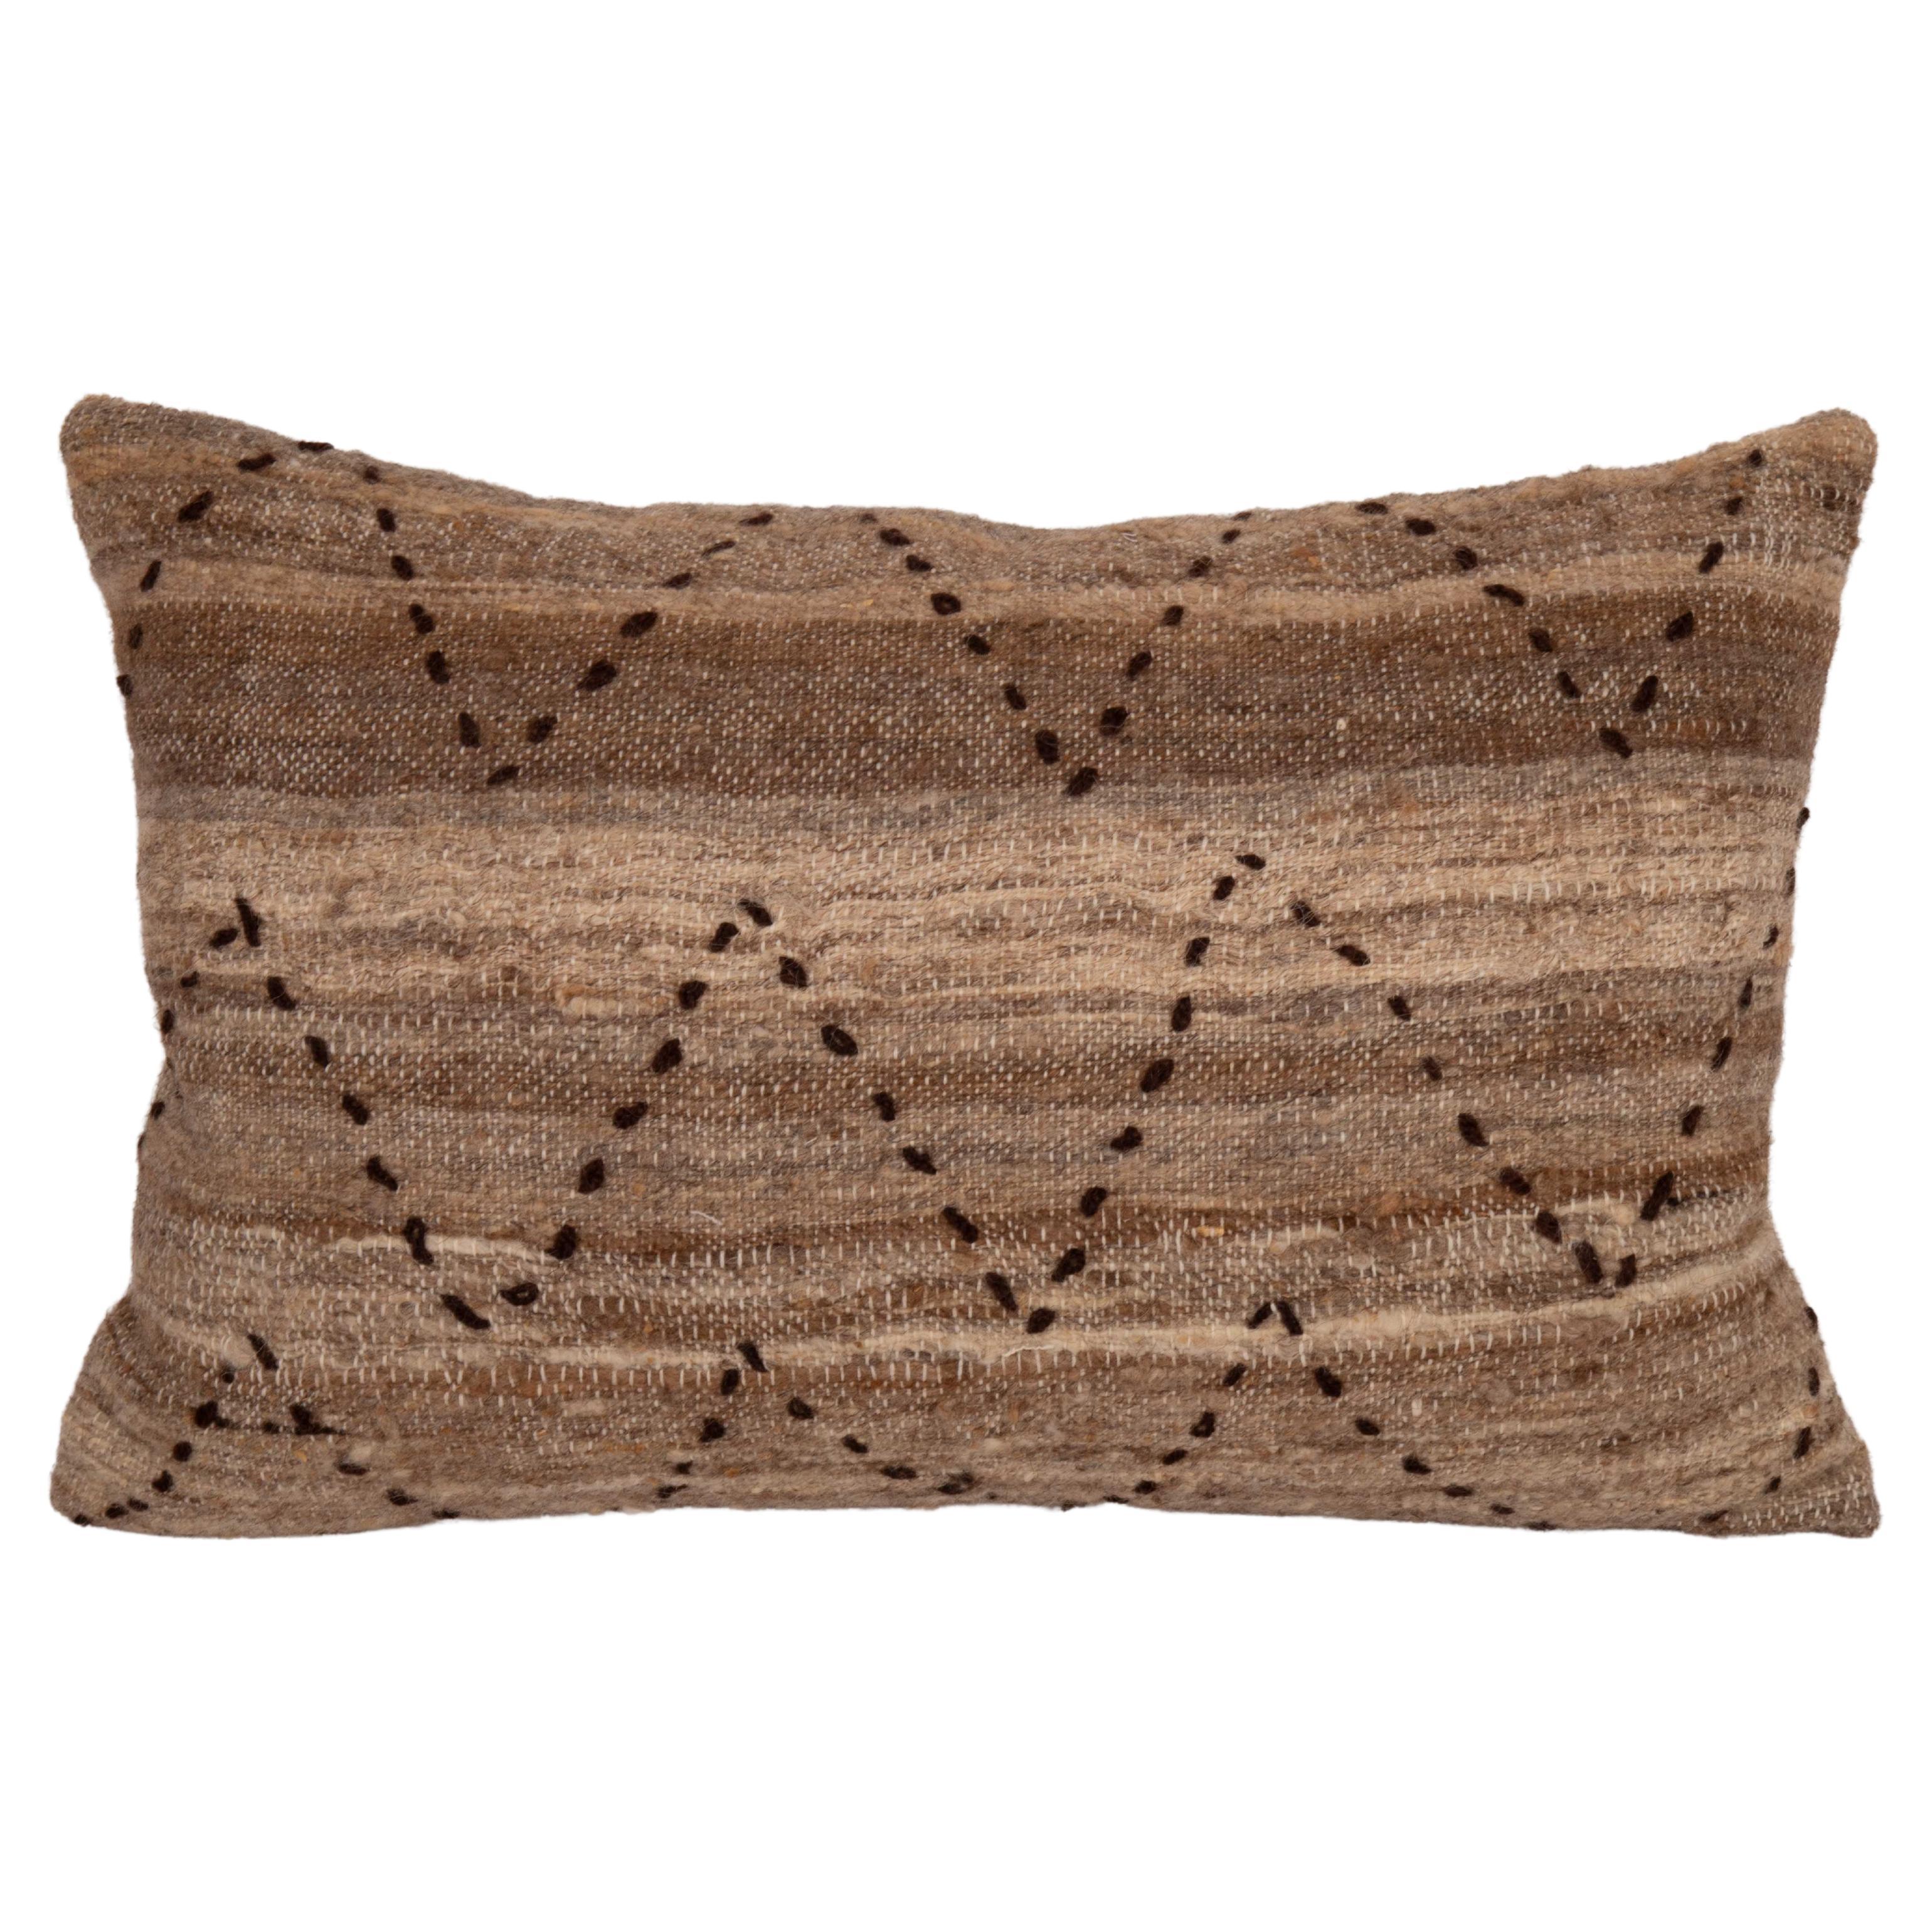 Neutral Pillow Case Made from a Vintage  Wool Cover, Mid-20th C For Sale